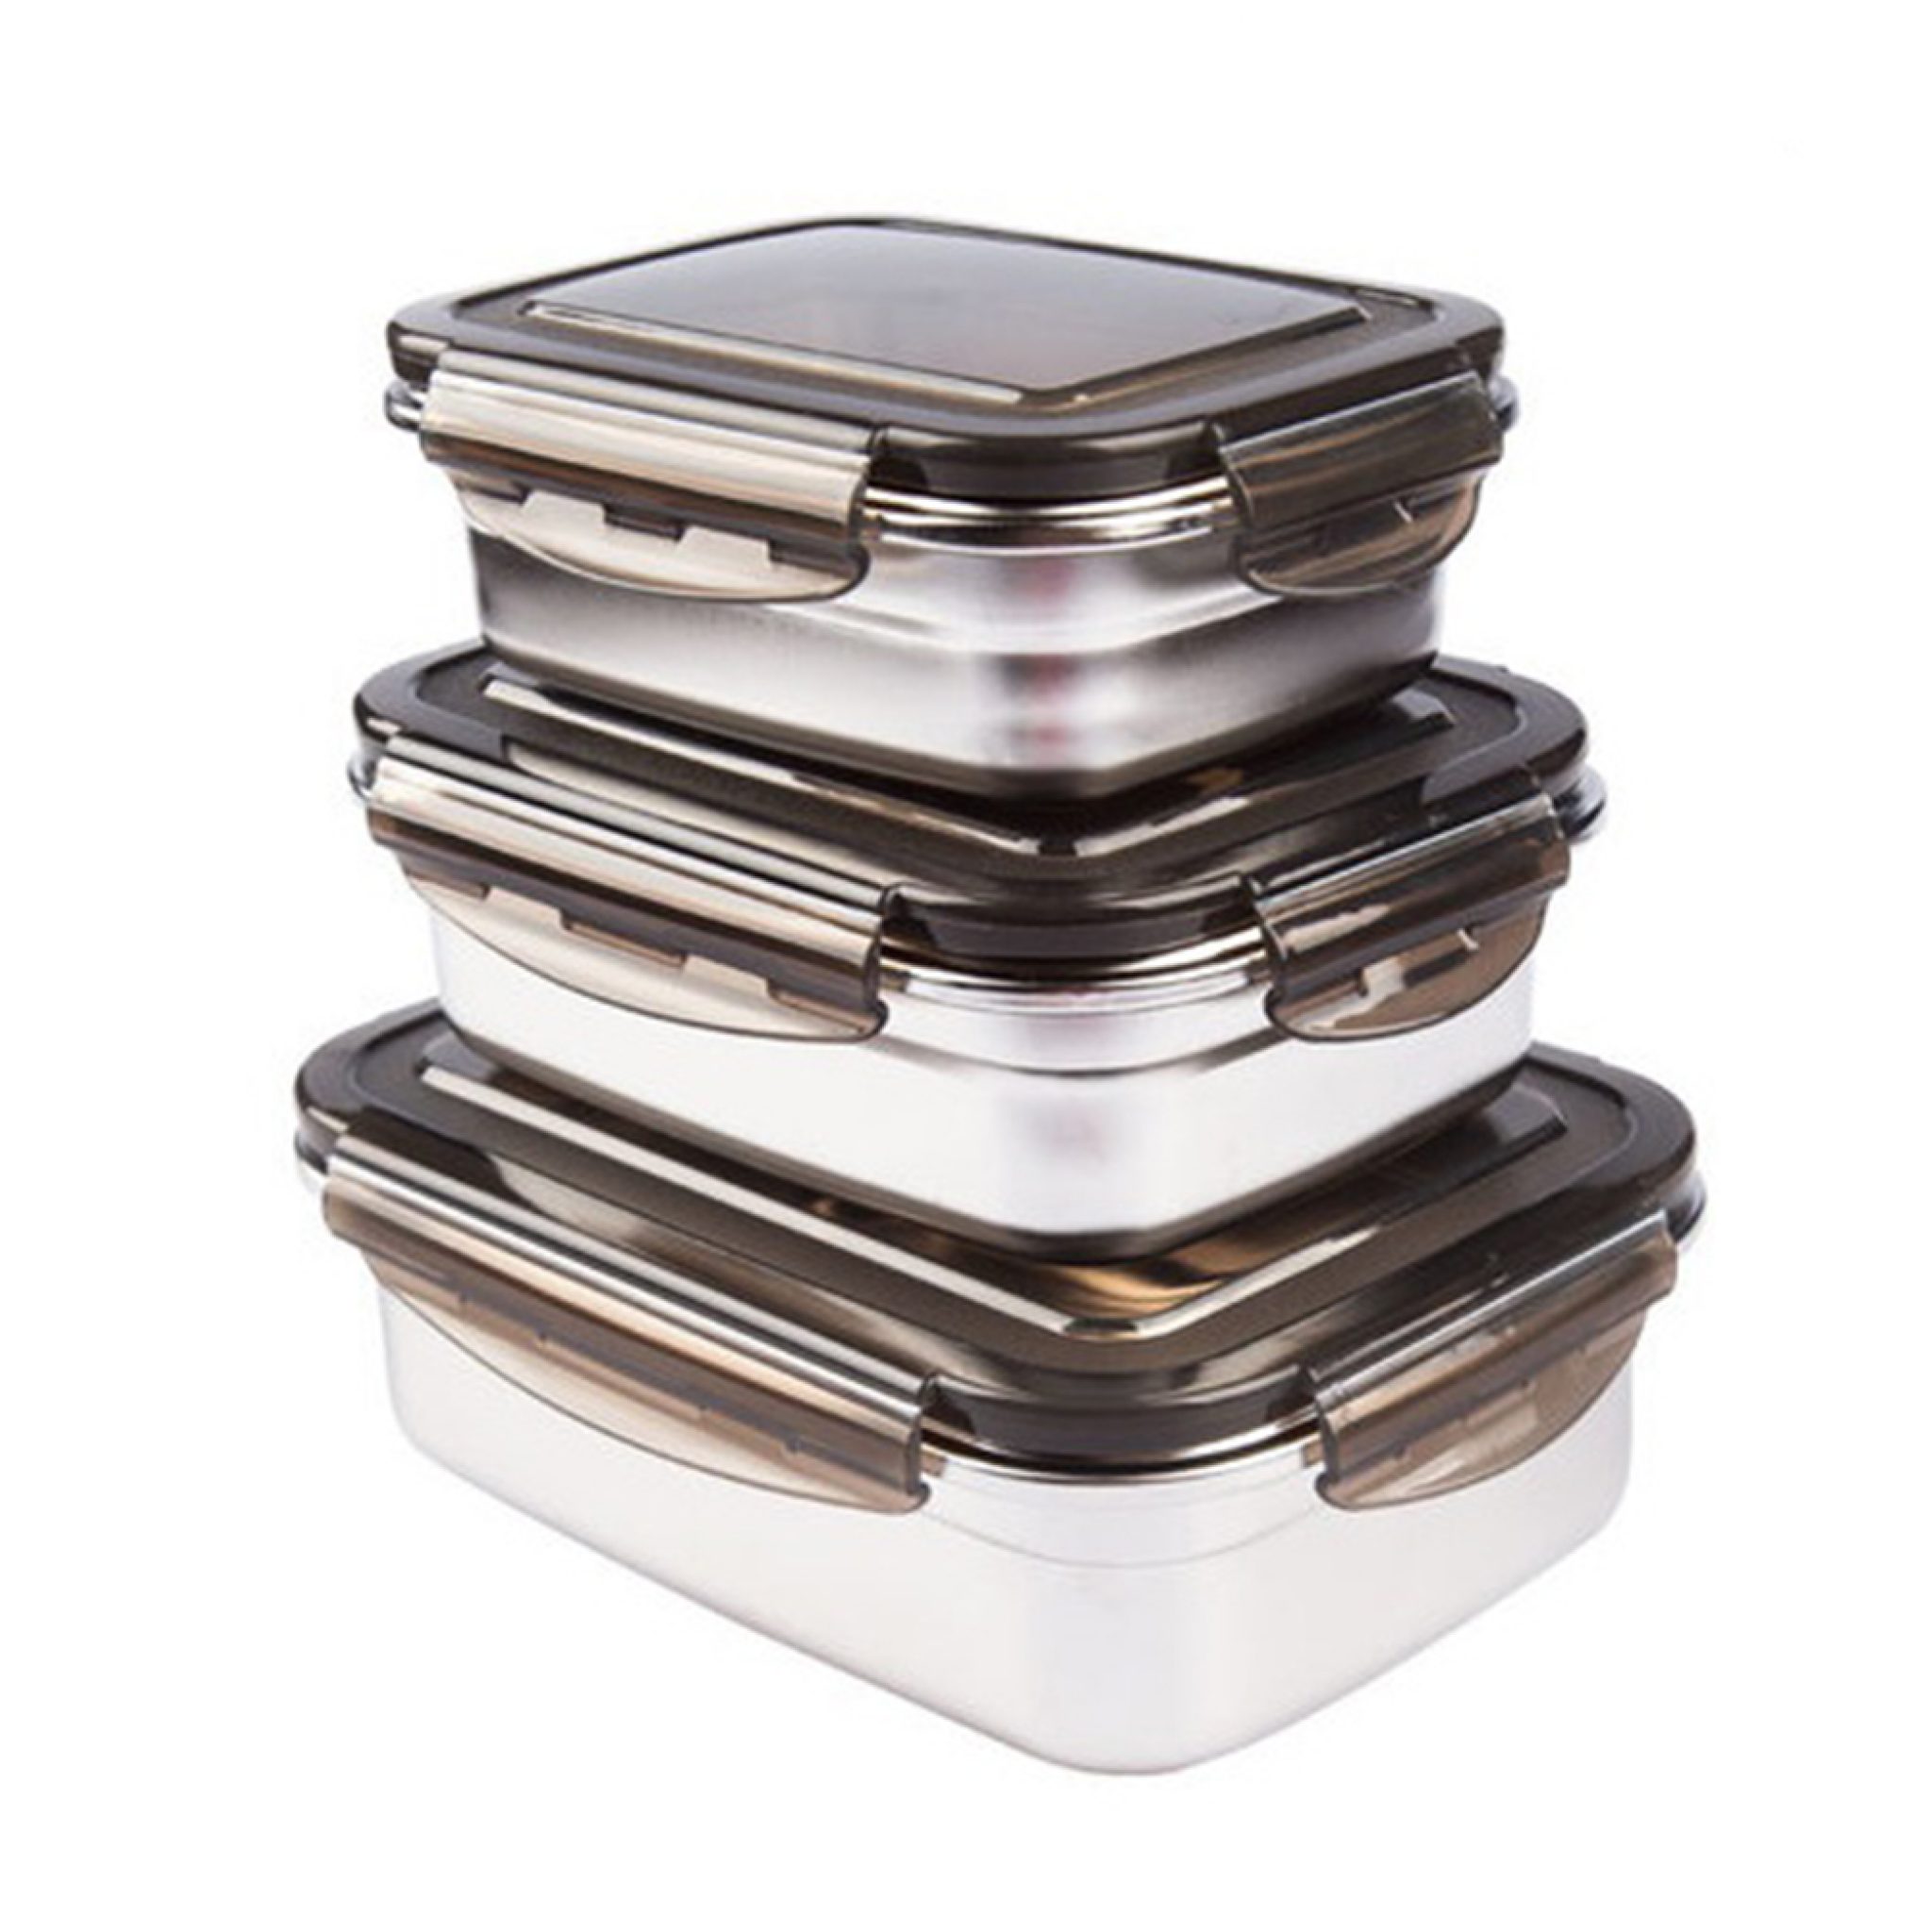 Rectangular Stainless Steel Food Storage Containers